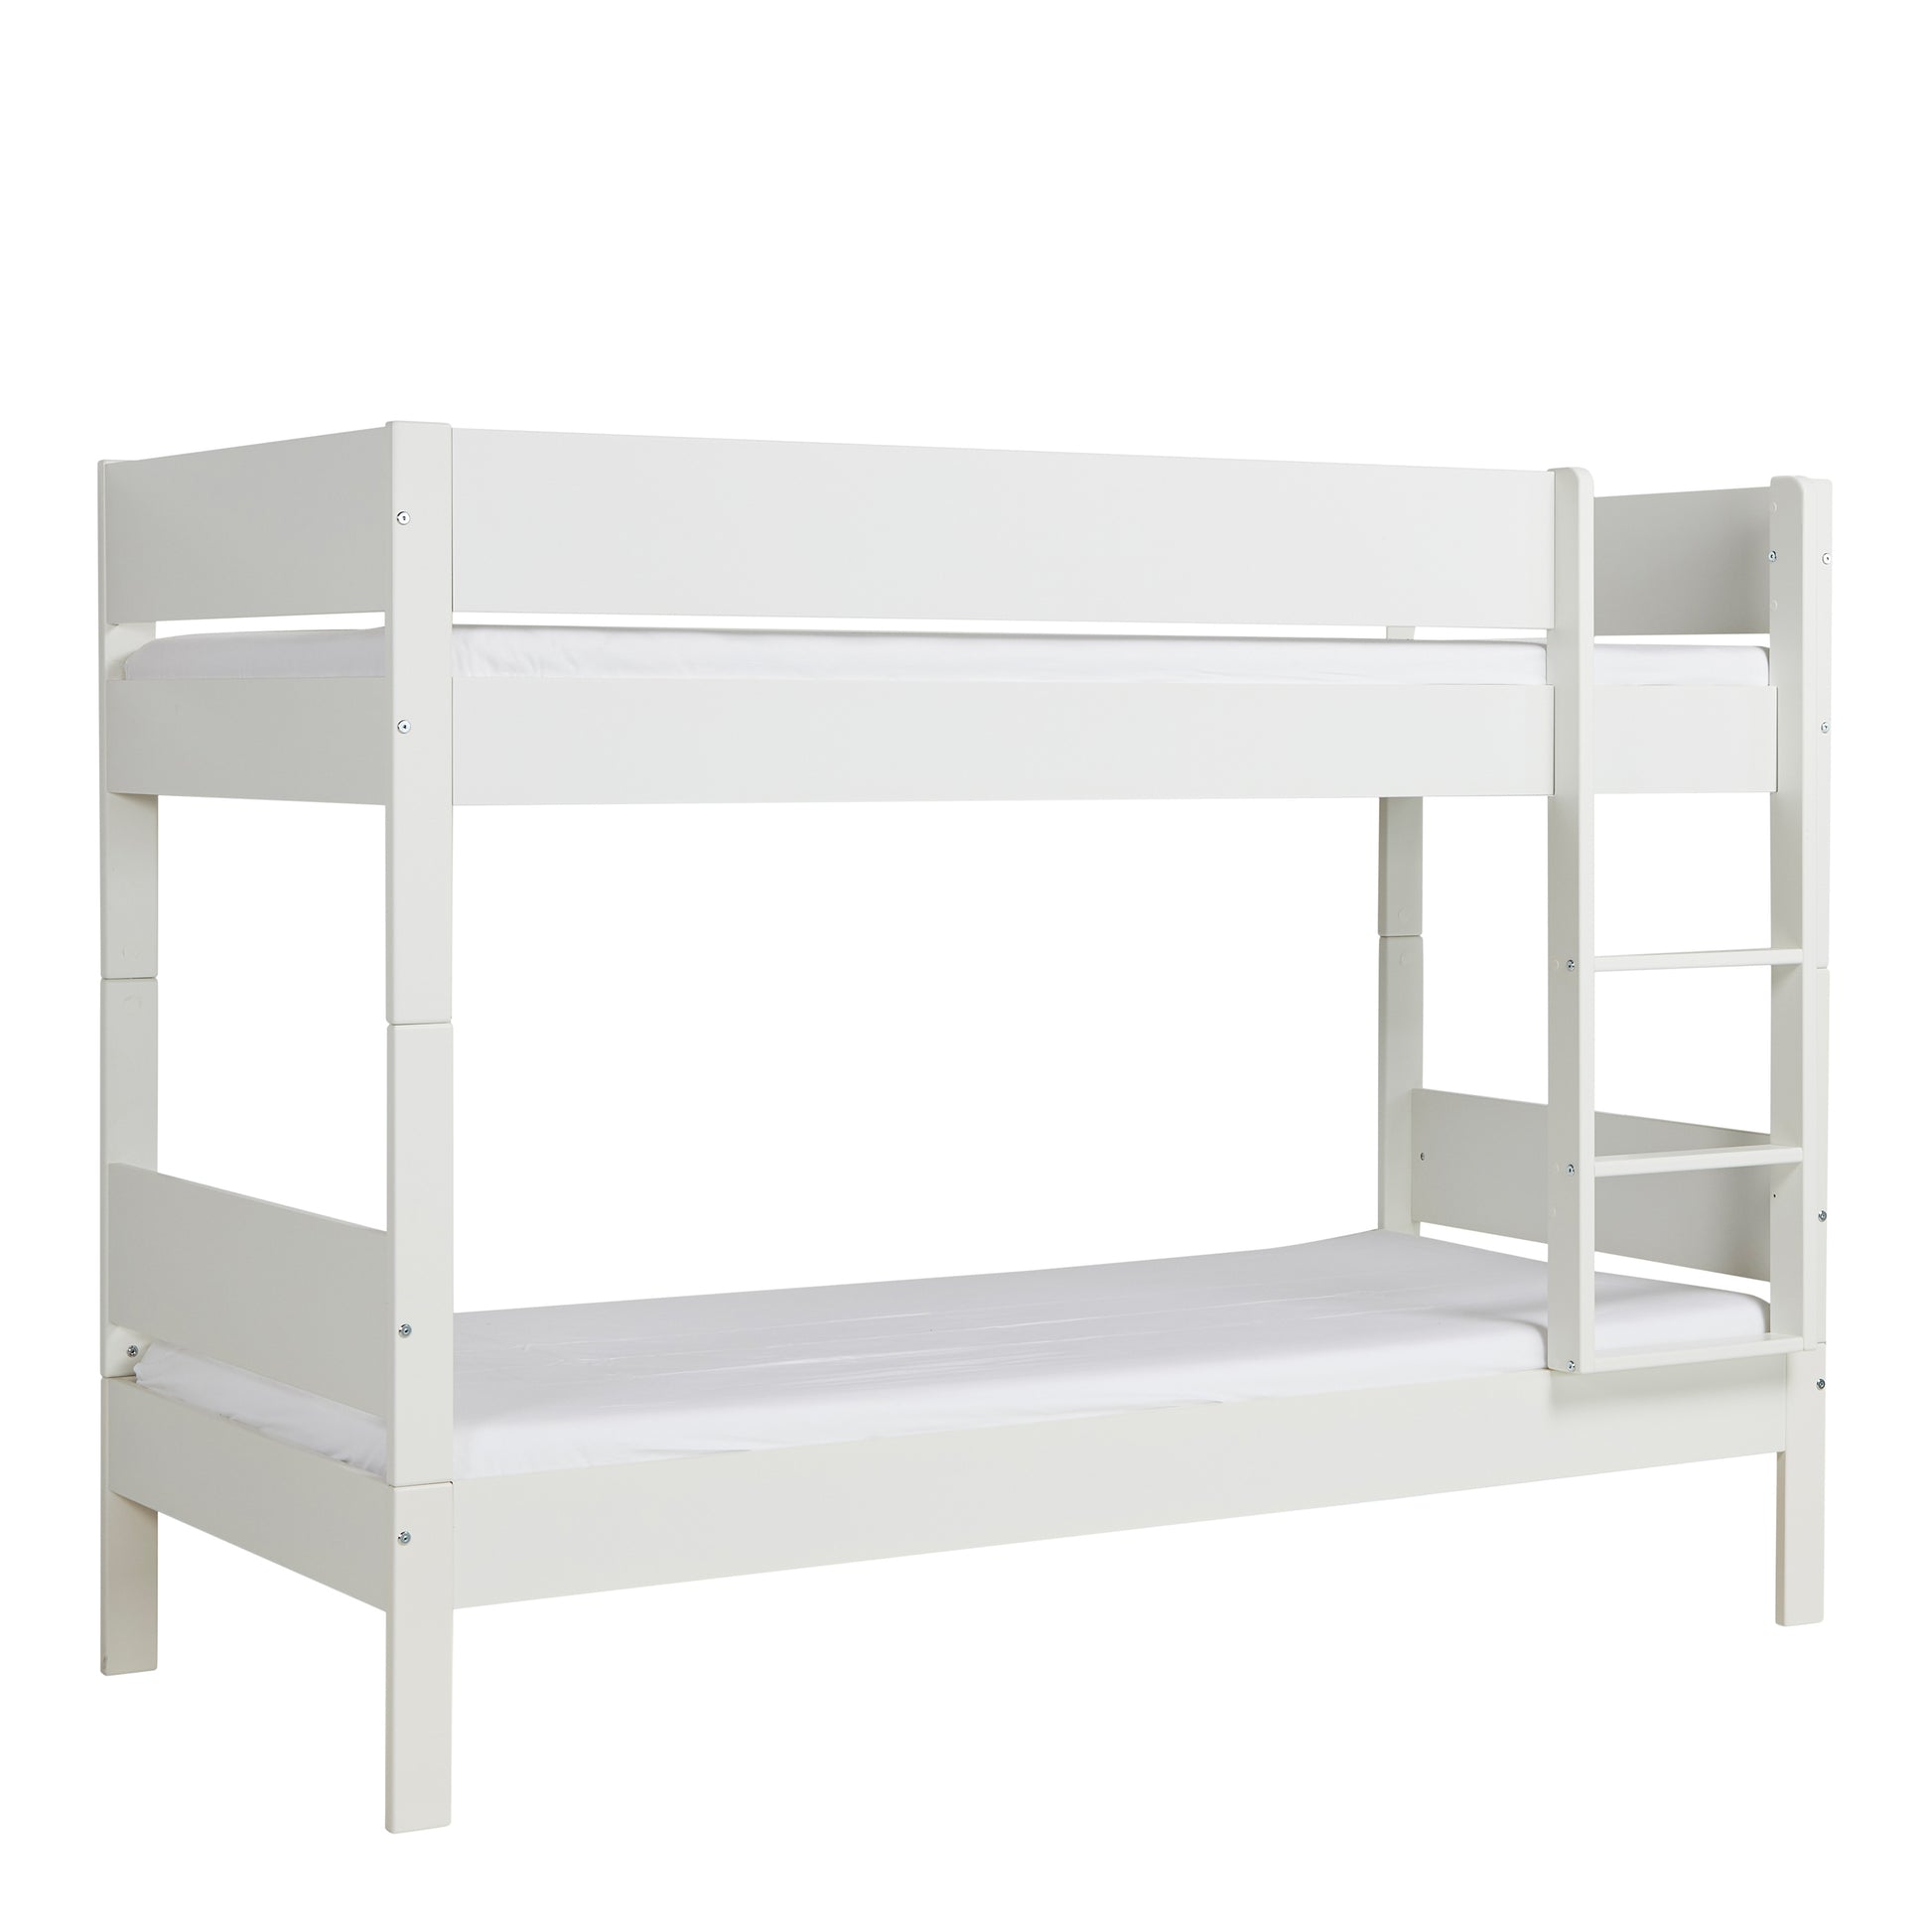 Huxie  Bunk Bed with side and back rails Including 3/4 safety rail